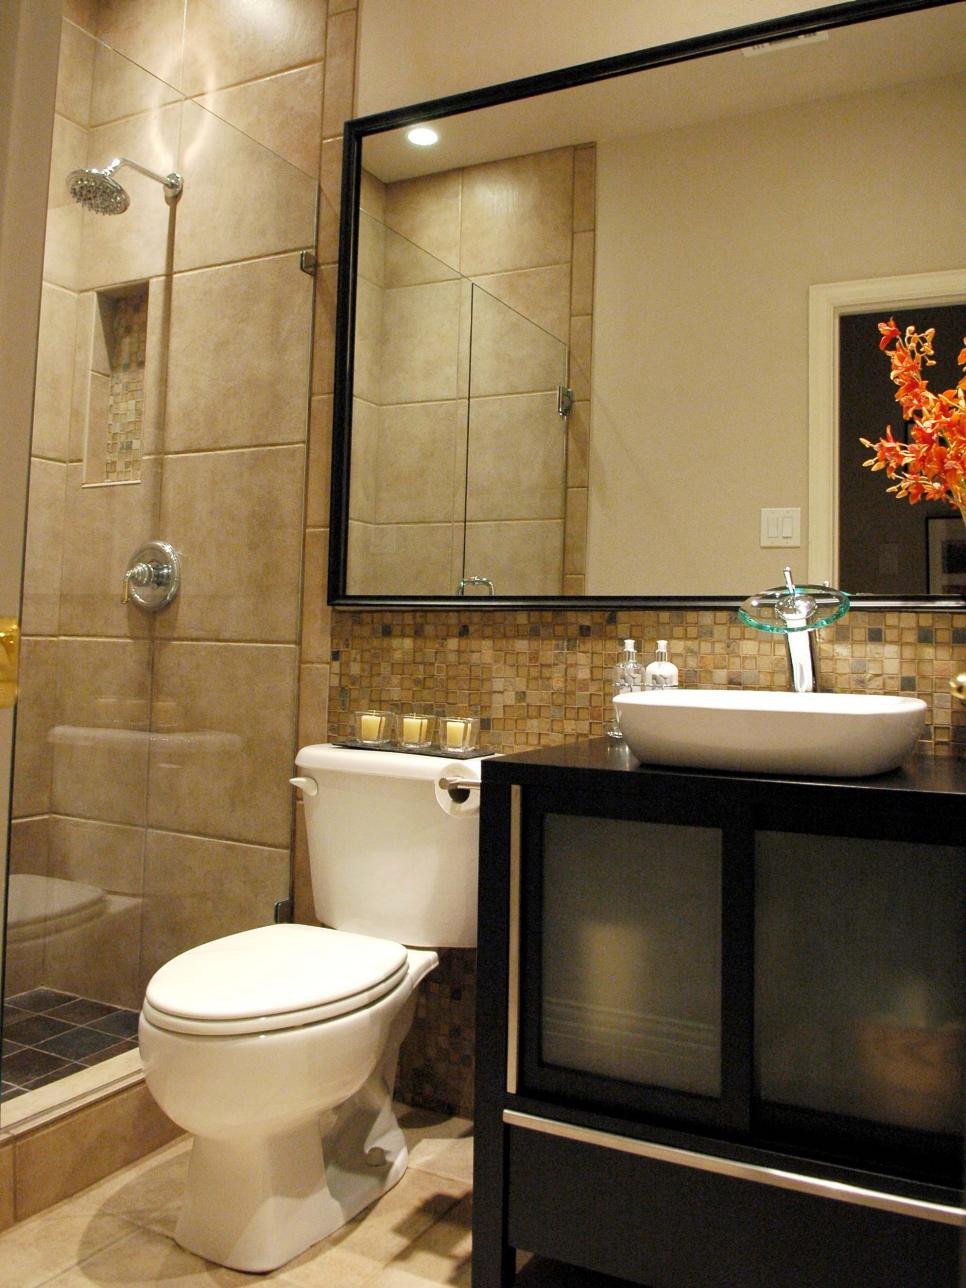 Bathroom Decor On A Budget Unique Bathrooms On A Bud Our 10 Favorites From Rate My Space